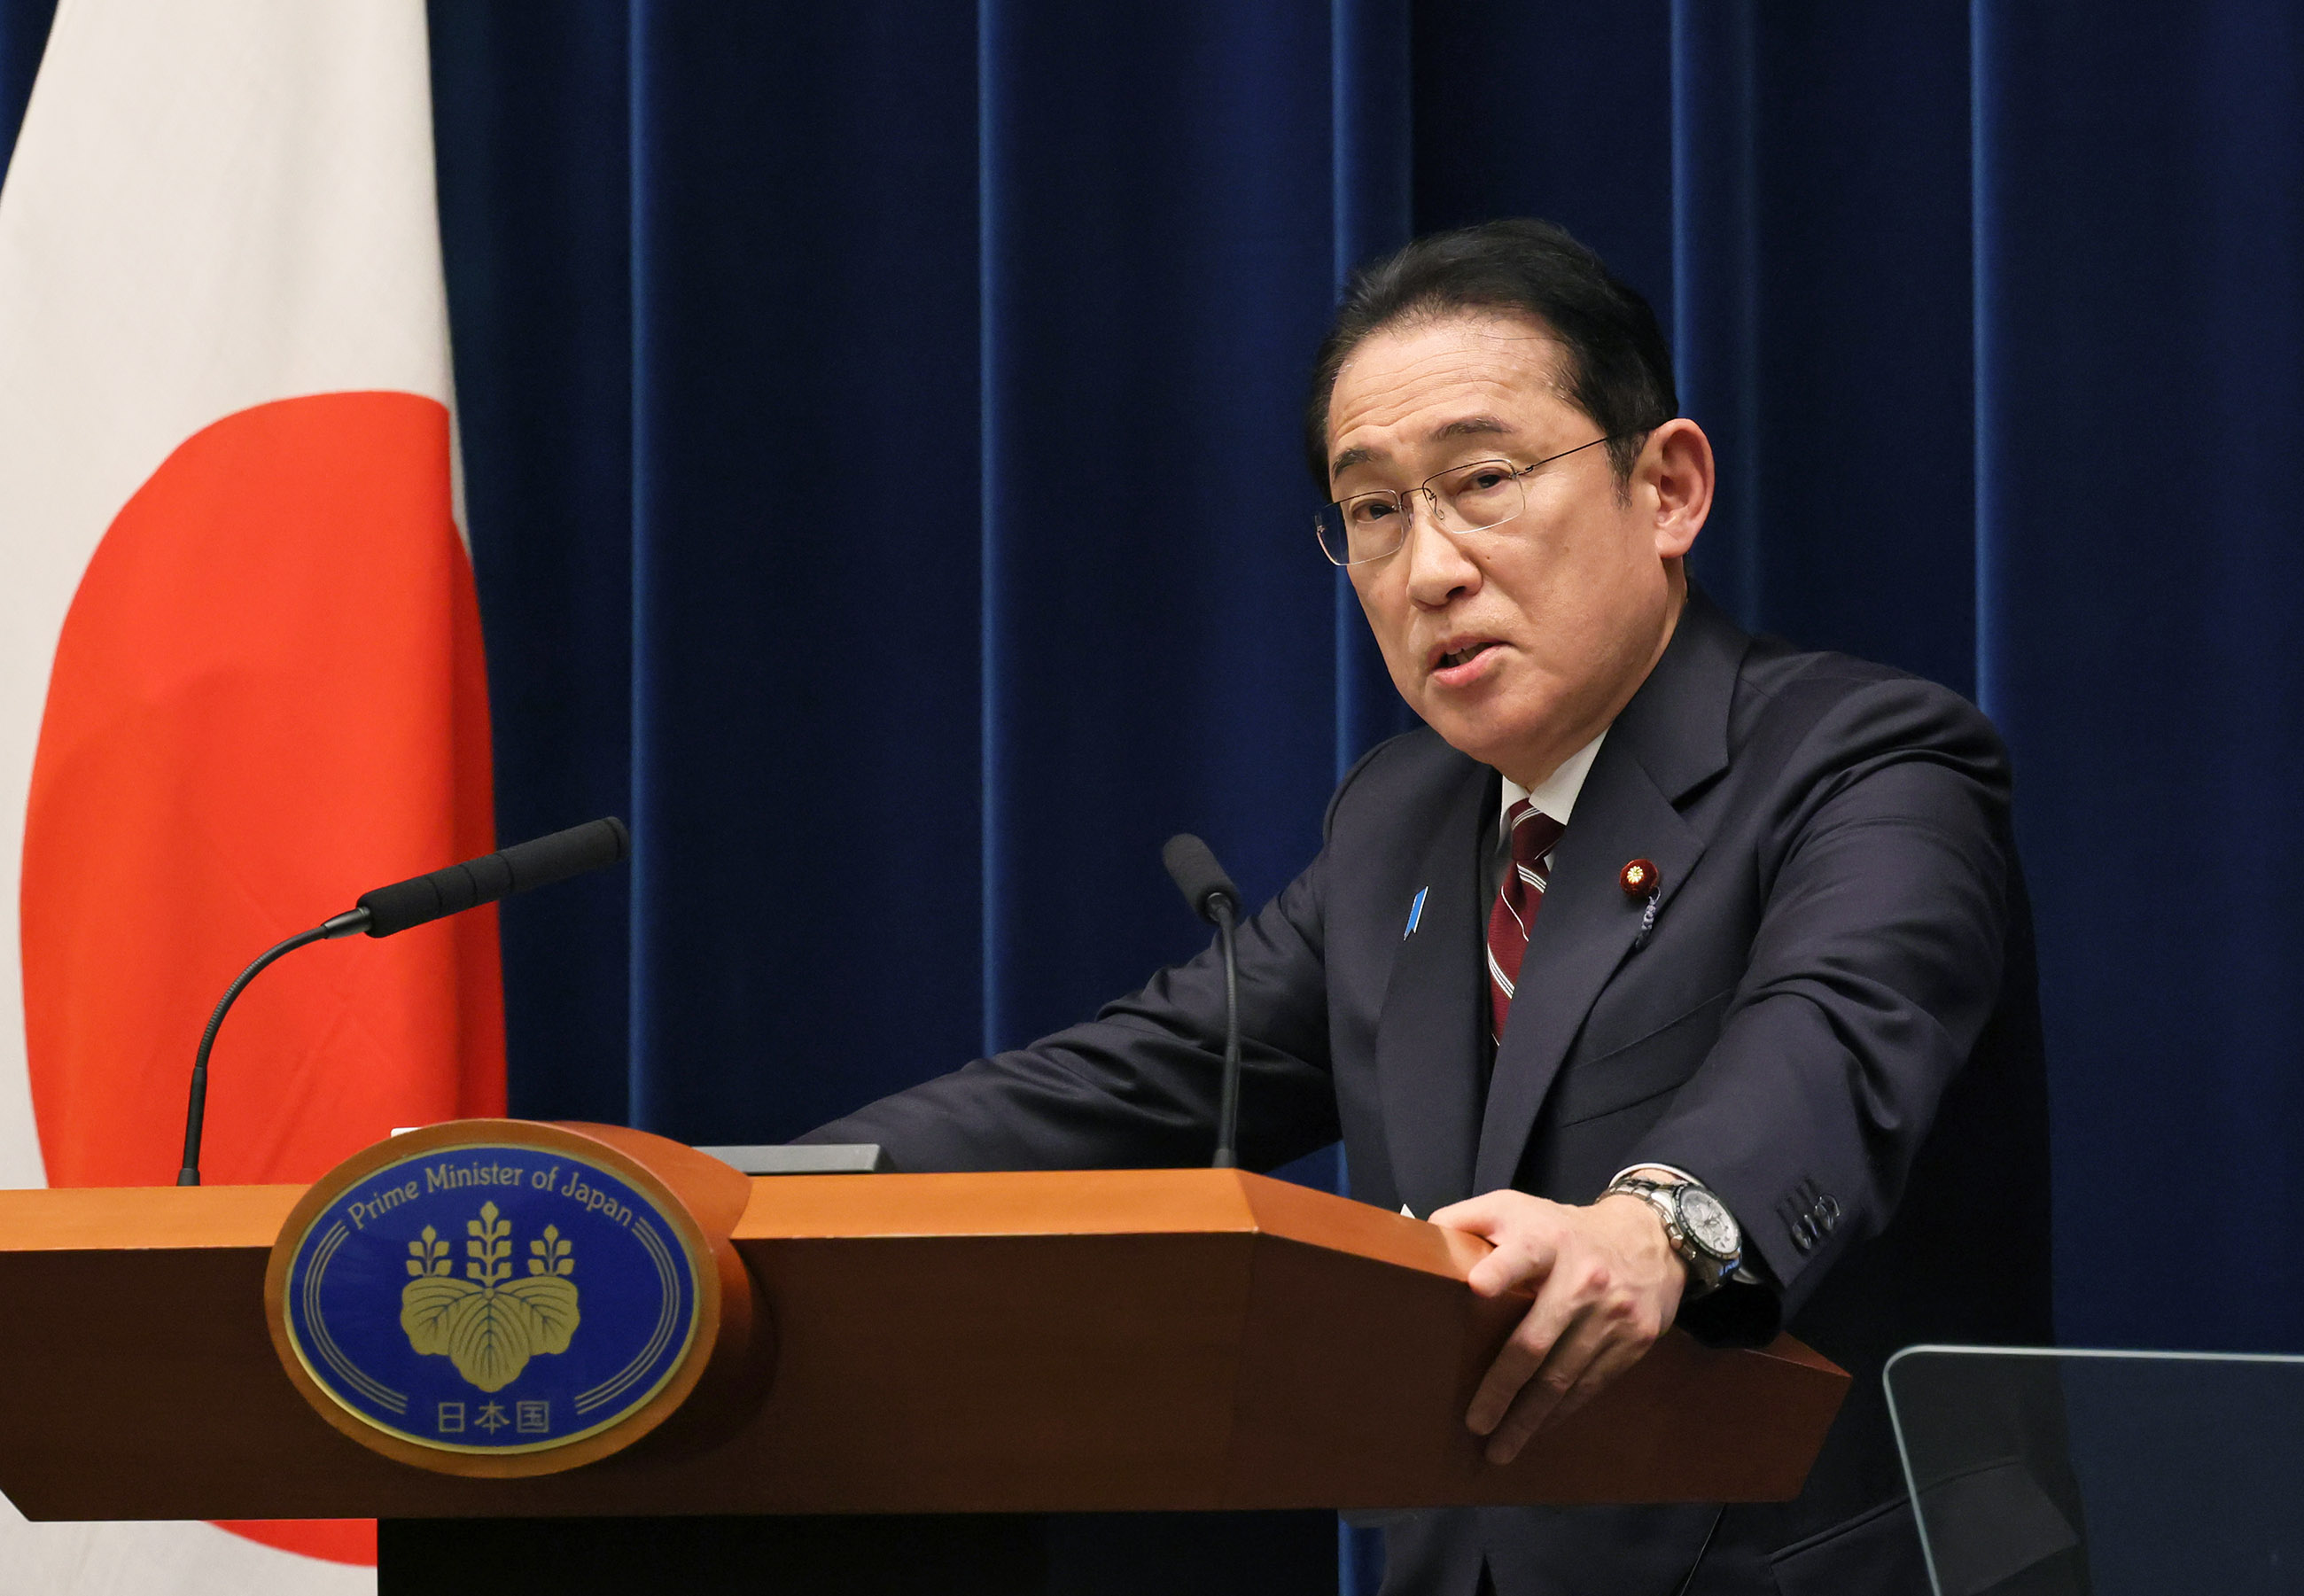 Prime Minister Kishida answering questions from the journalists (6)